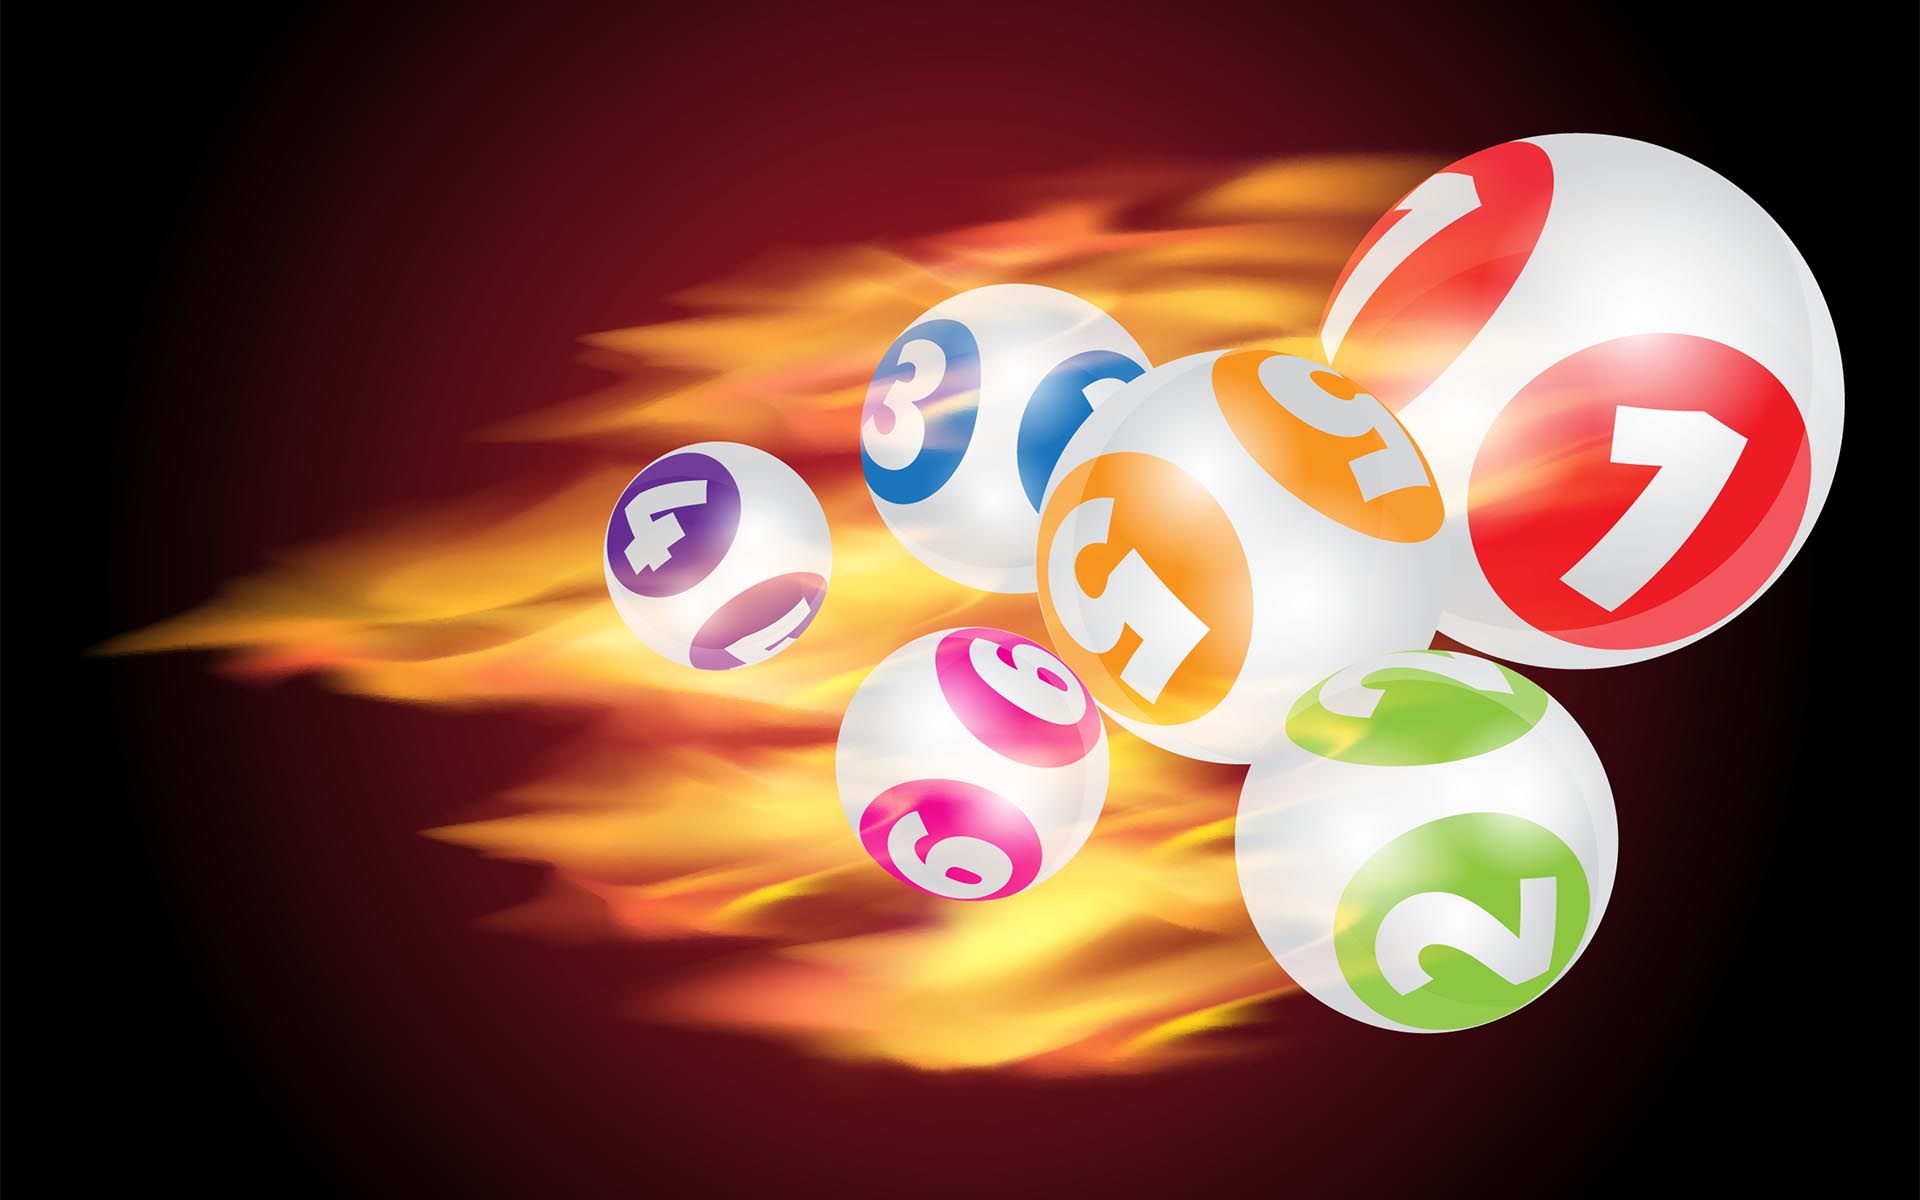 Fire Lotto to Launch First International Blockchain-based Lottery